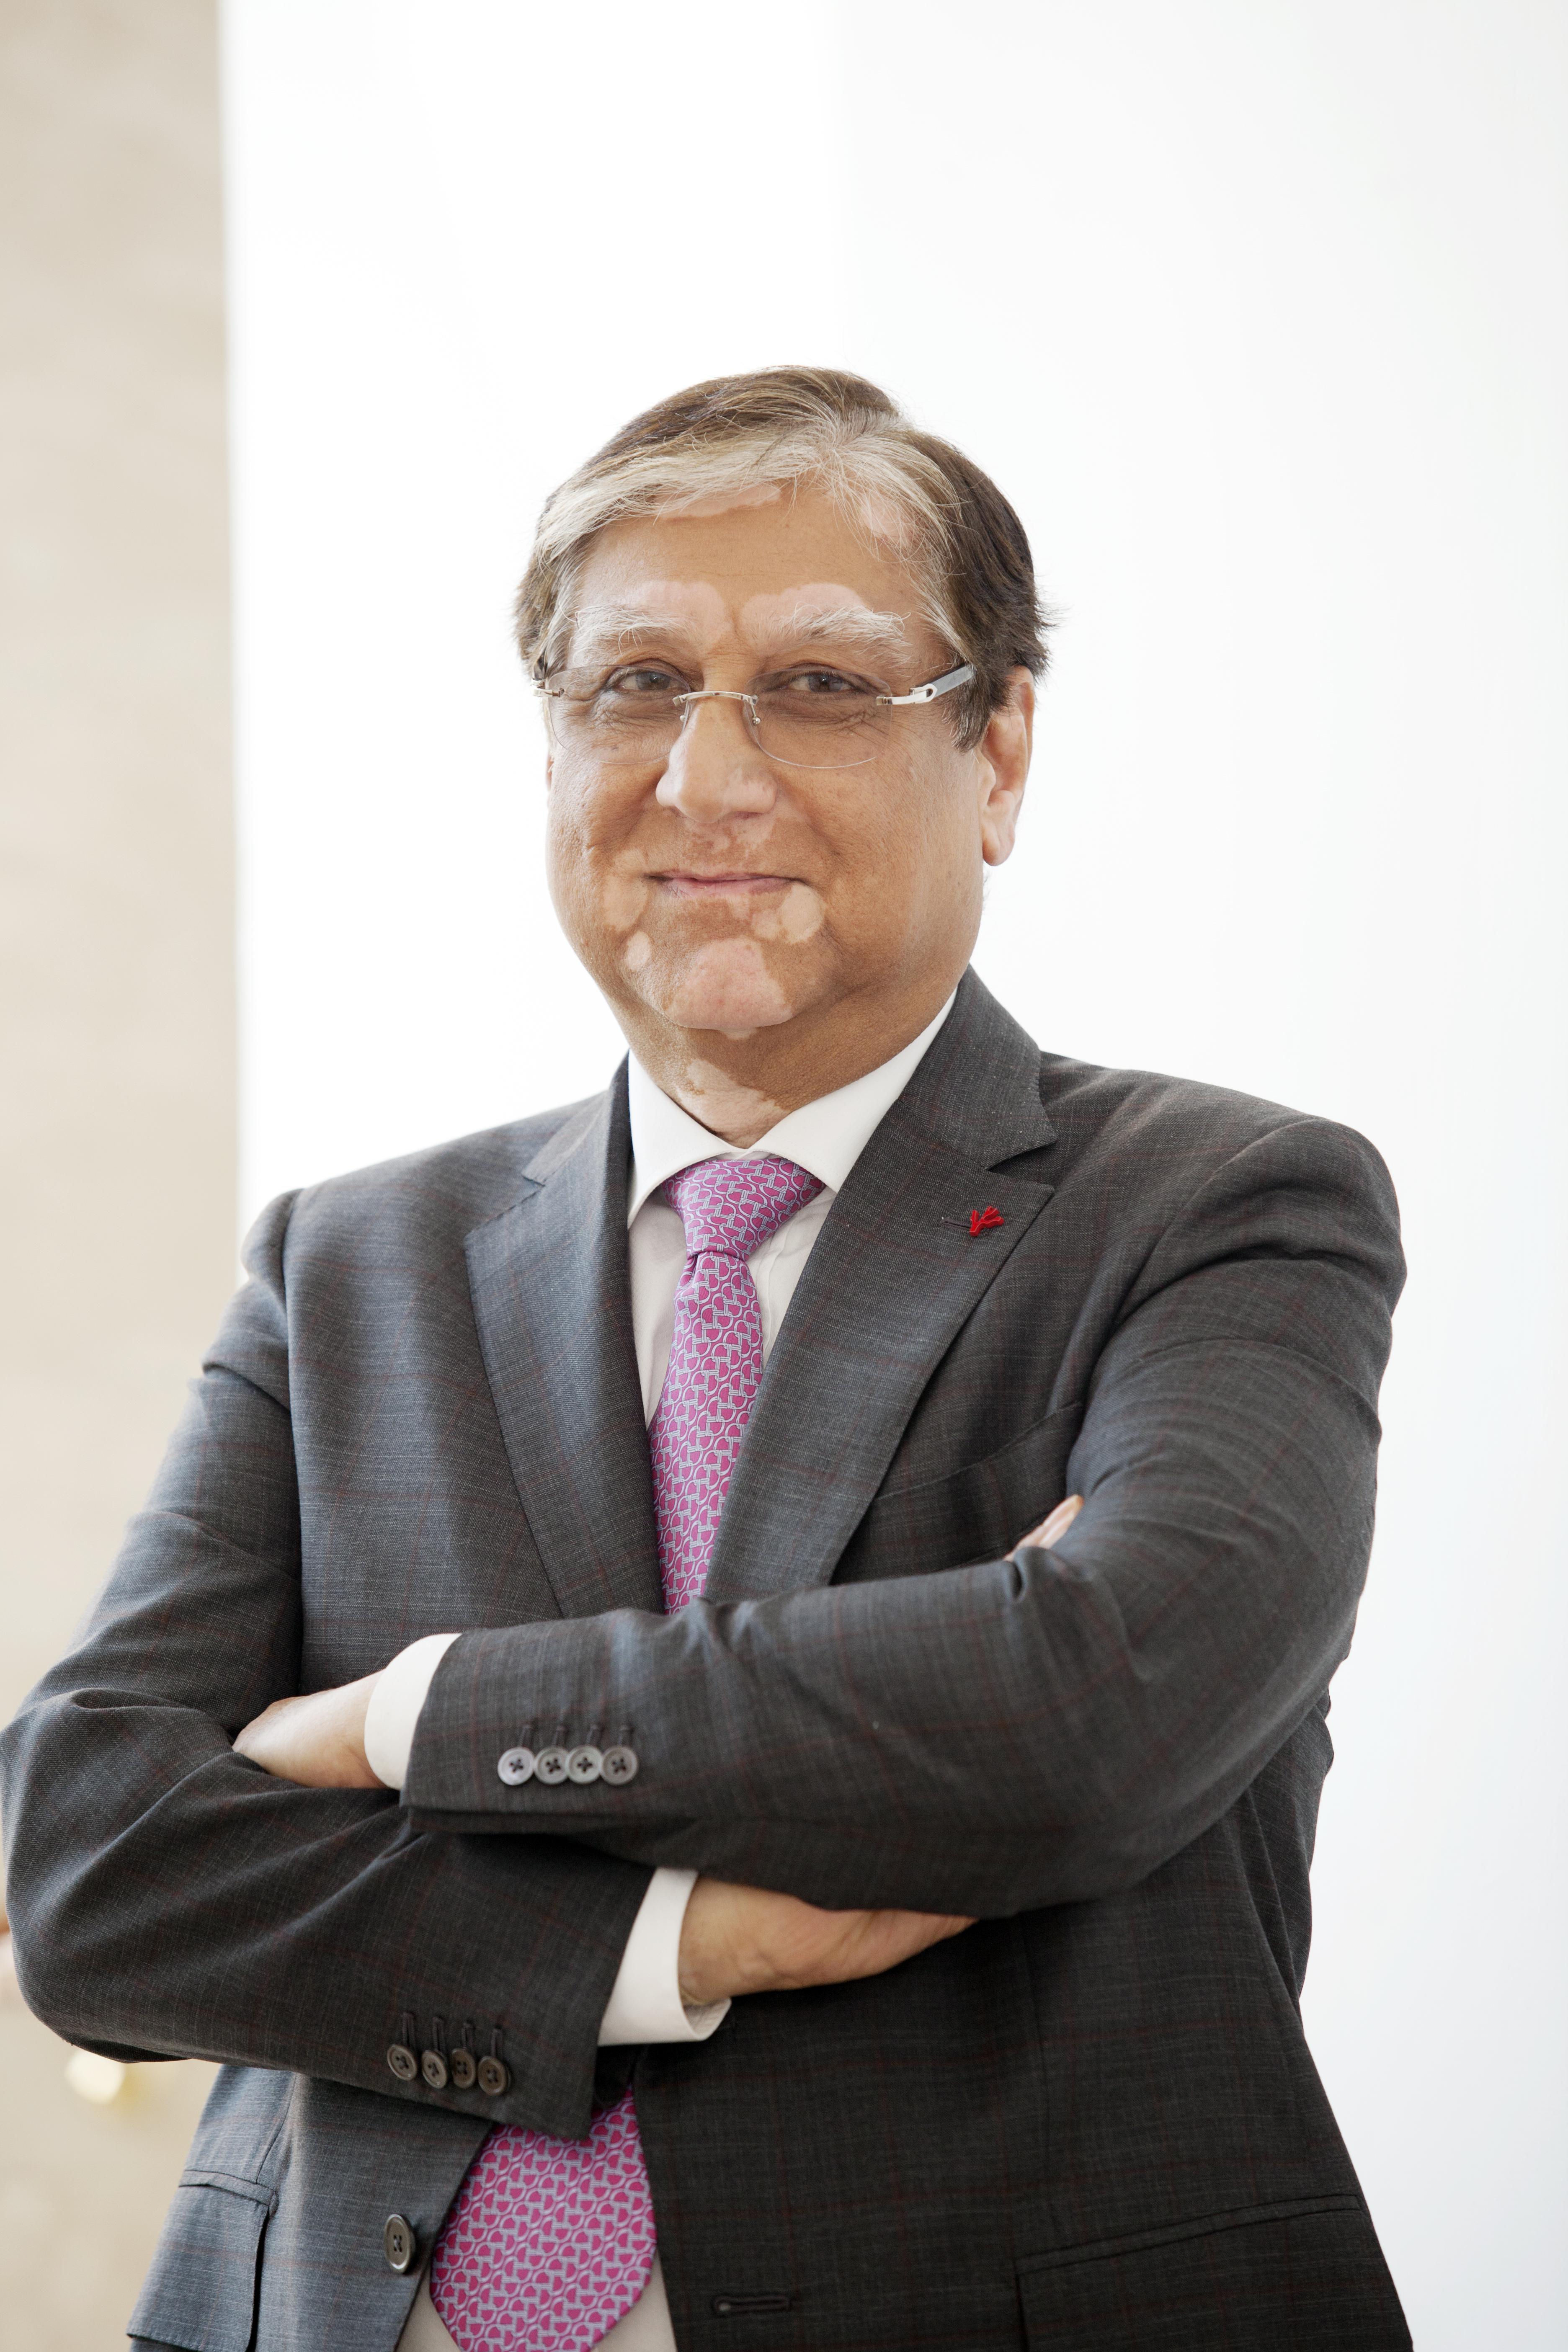 According to Suman Kant Munjal, chairman and managing director, Rockman Industries, carbon composites is expected to account for 10% of Rockman Industries turnover in the next five years.